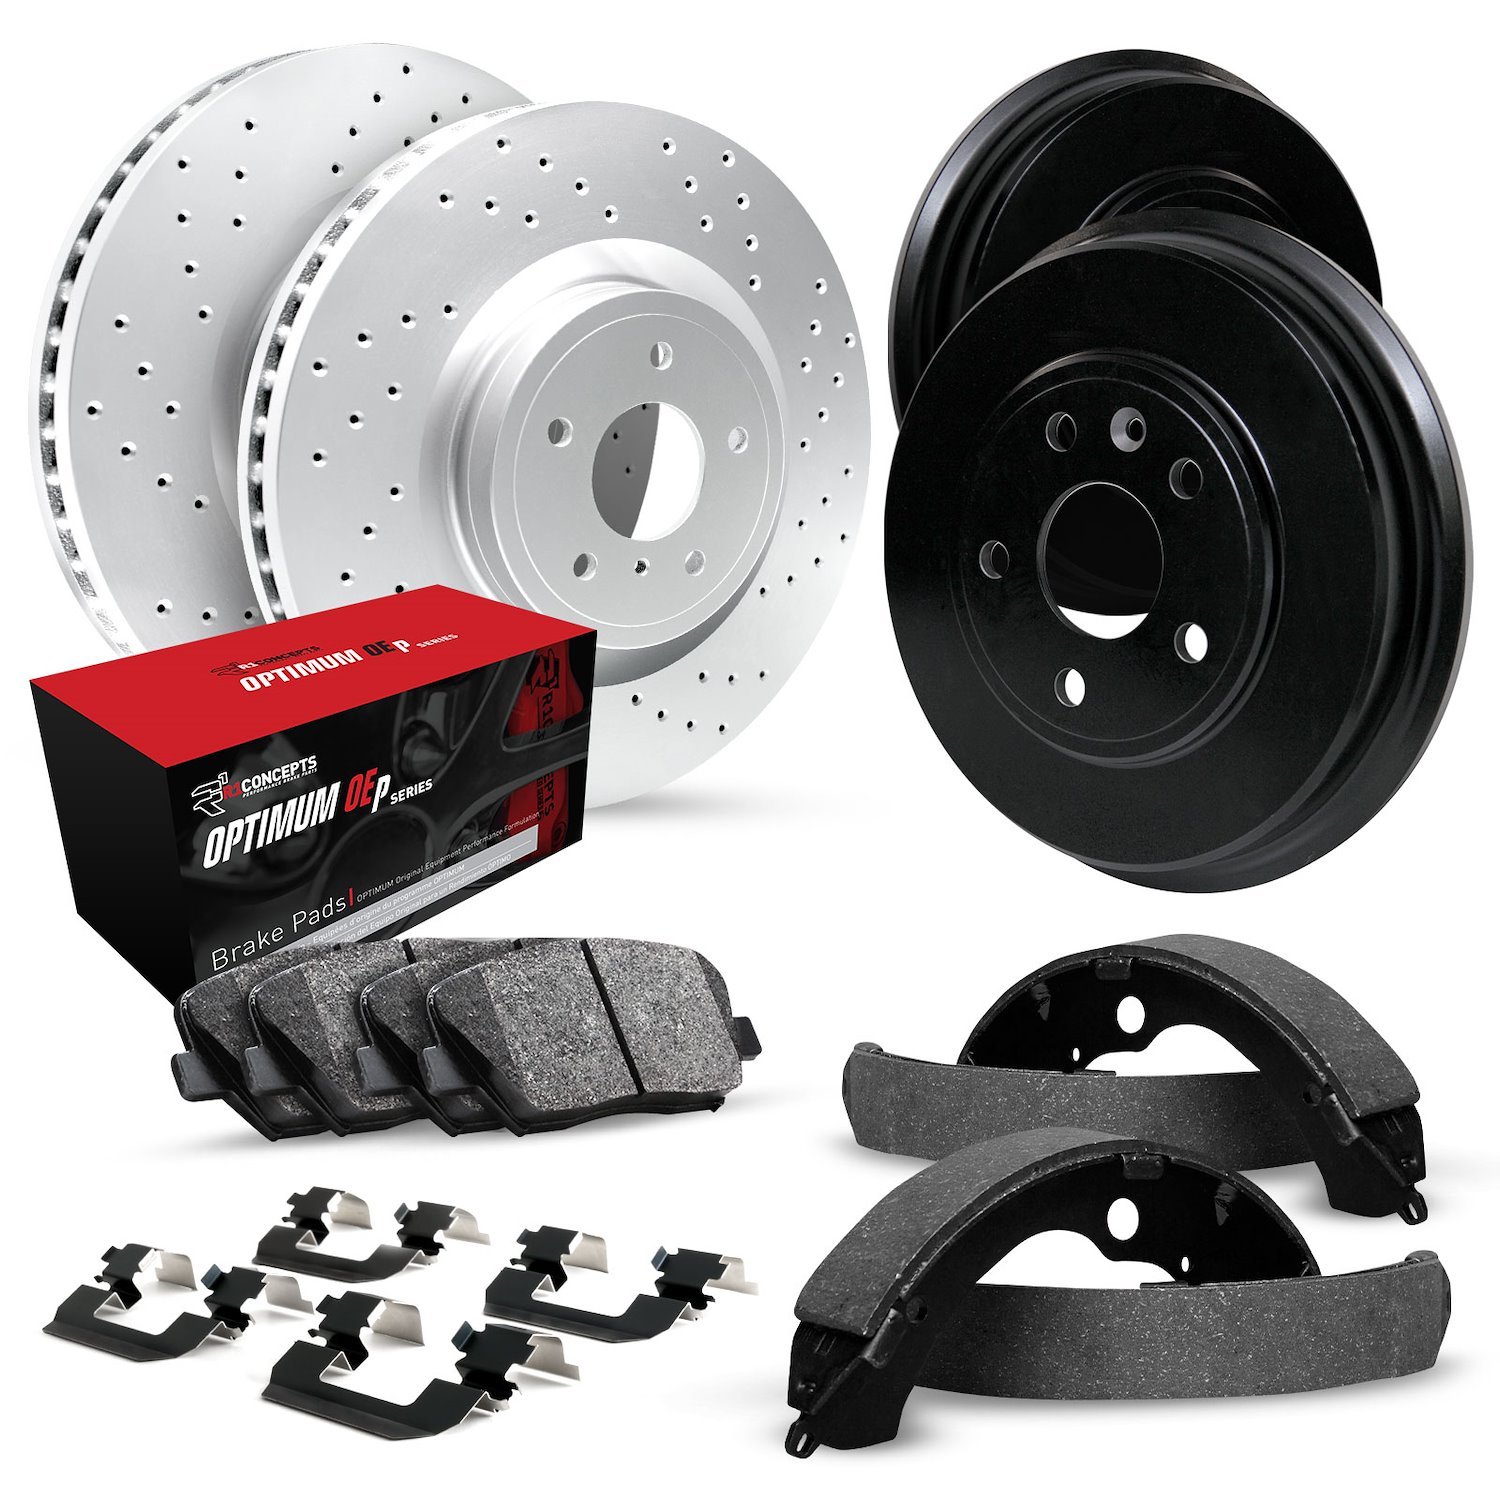 GEO-Carbon Drilled Brake Rotor & Drum Set w/Optimum OE Pads, Shoes, & Hardware, 1974-1975 GM, Position: Front & Rear